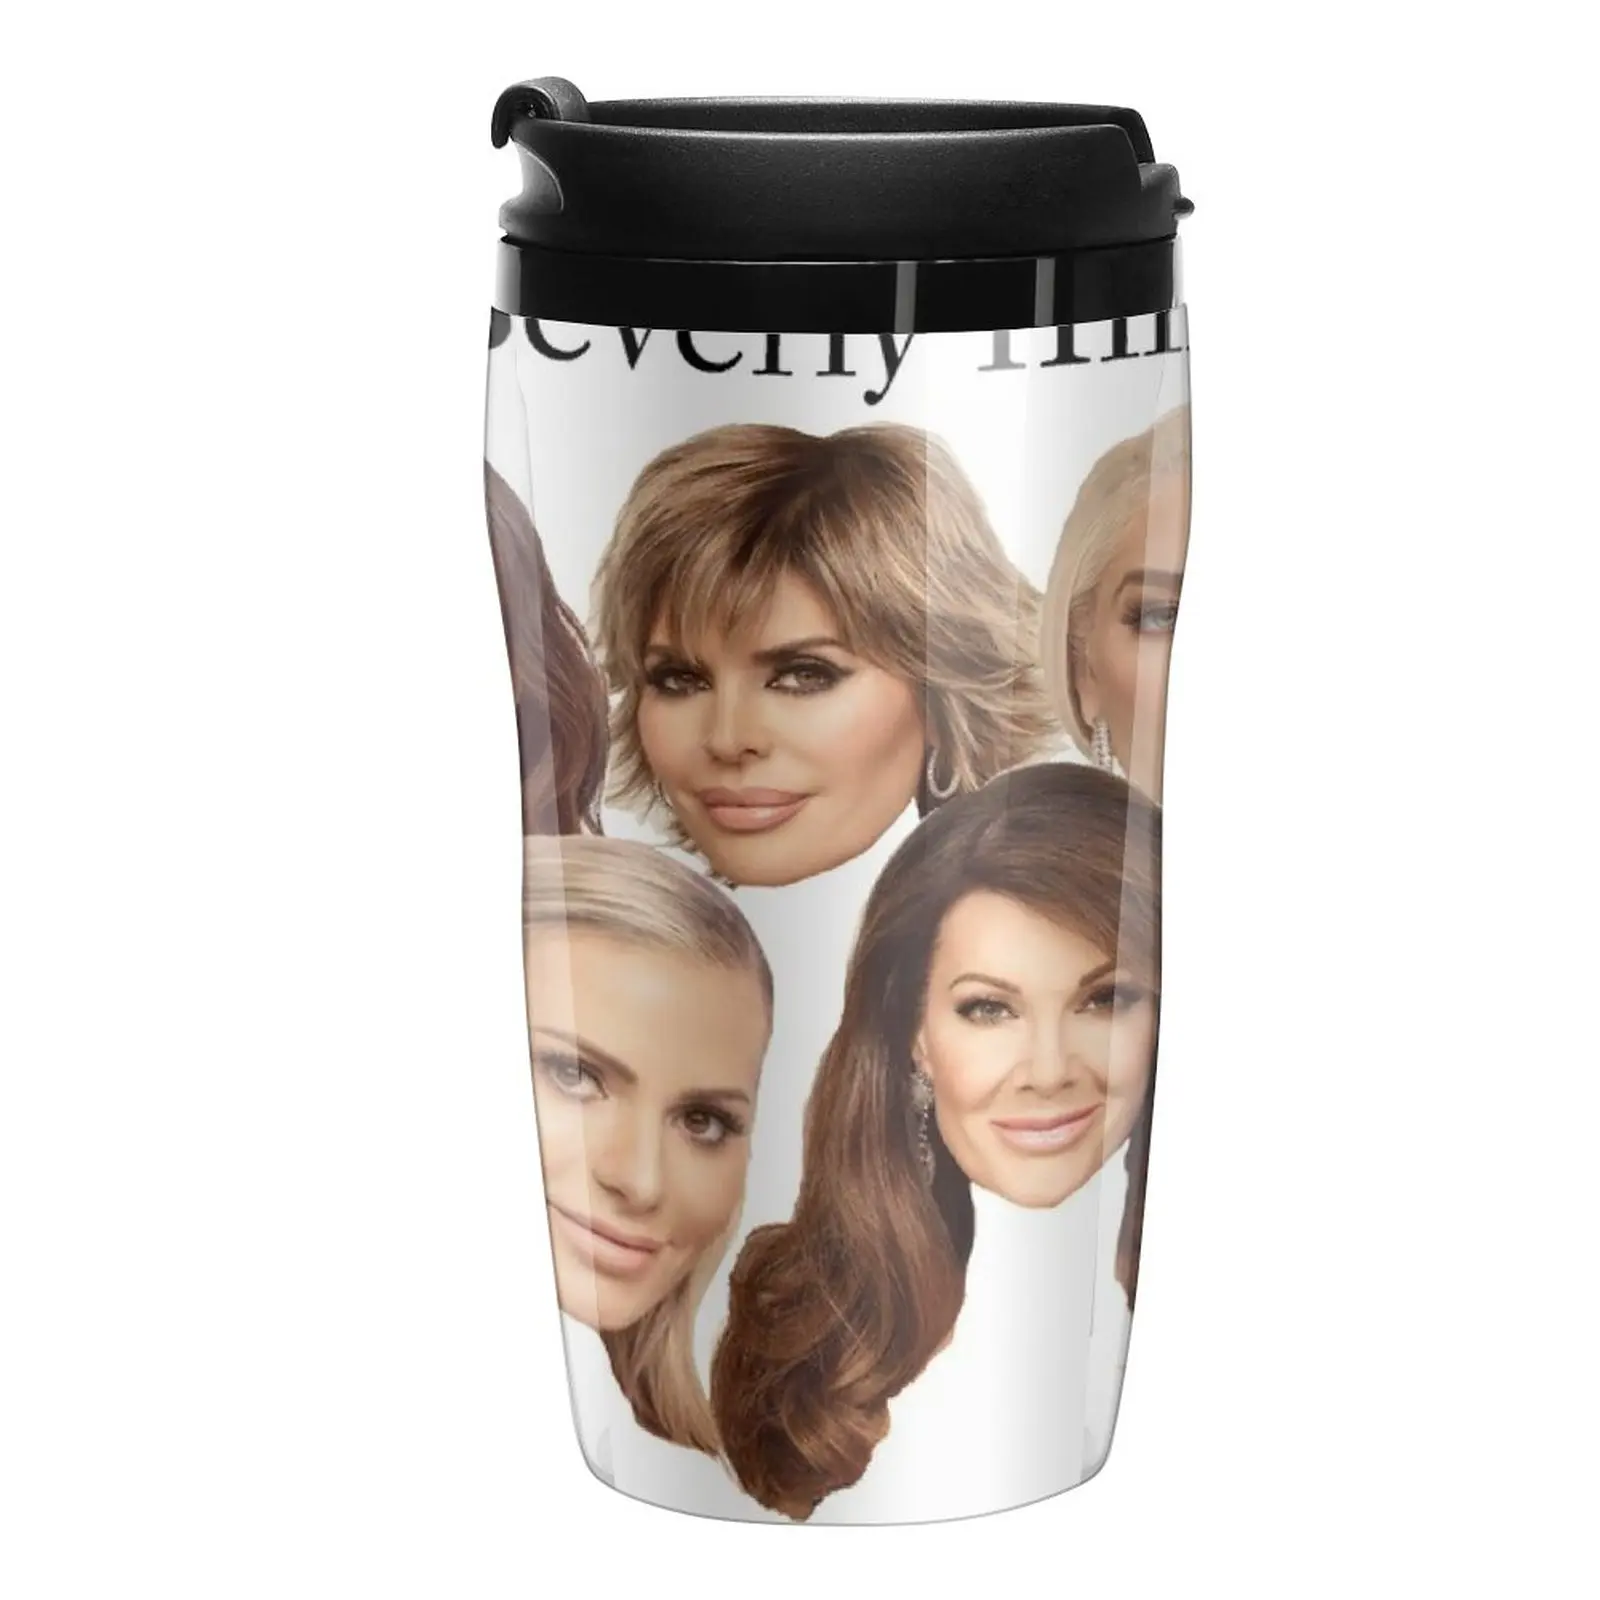 

New Real Housewives of Beverly Hills Travel Coffee Mug Cup Coffee Coffee Cups Sets Coffee Mugs